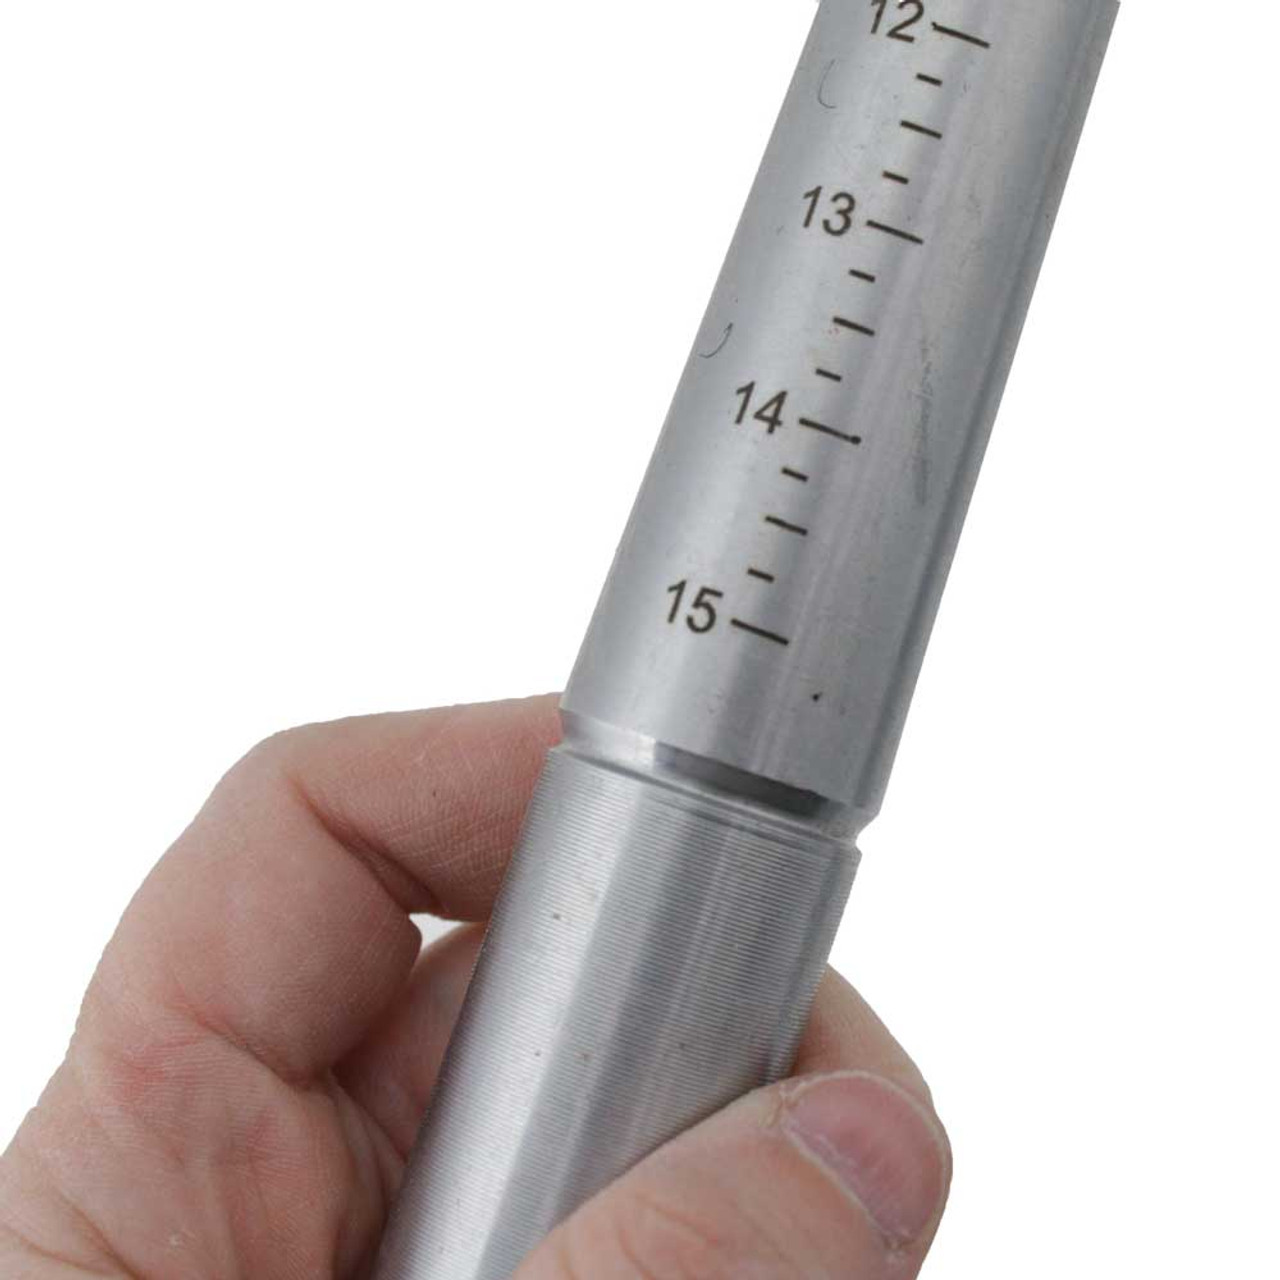 Wapiti Designs Expanding Stainless Steel Ring Mandrel for Ring Turning and Ring Making. (Ring Sizes 11-14)